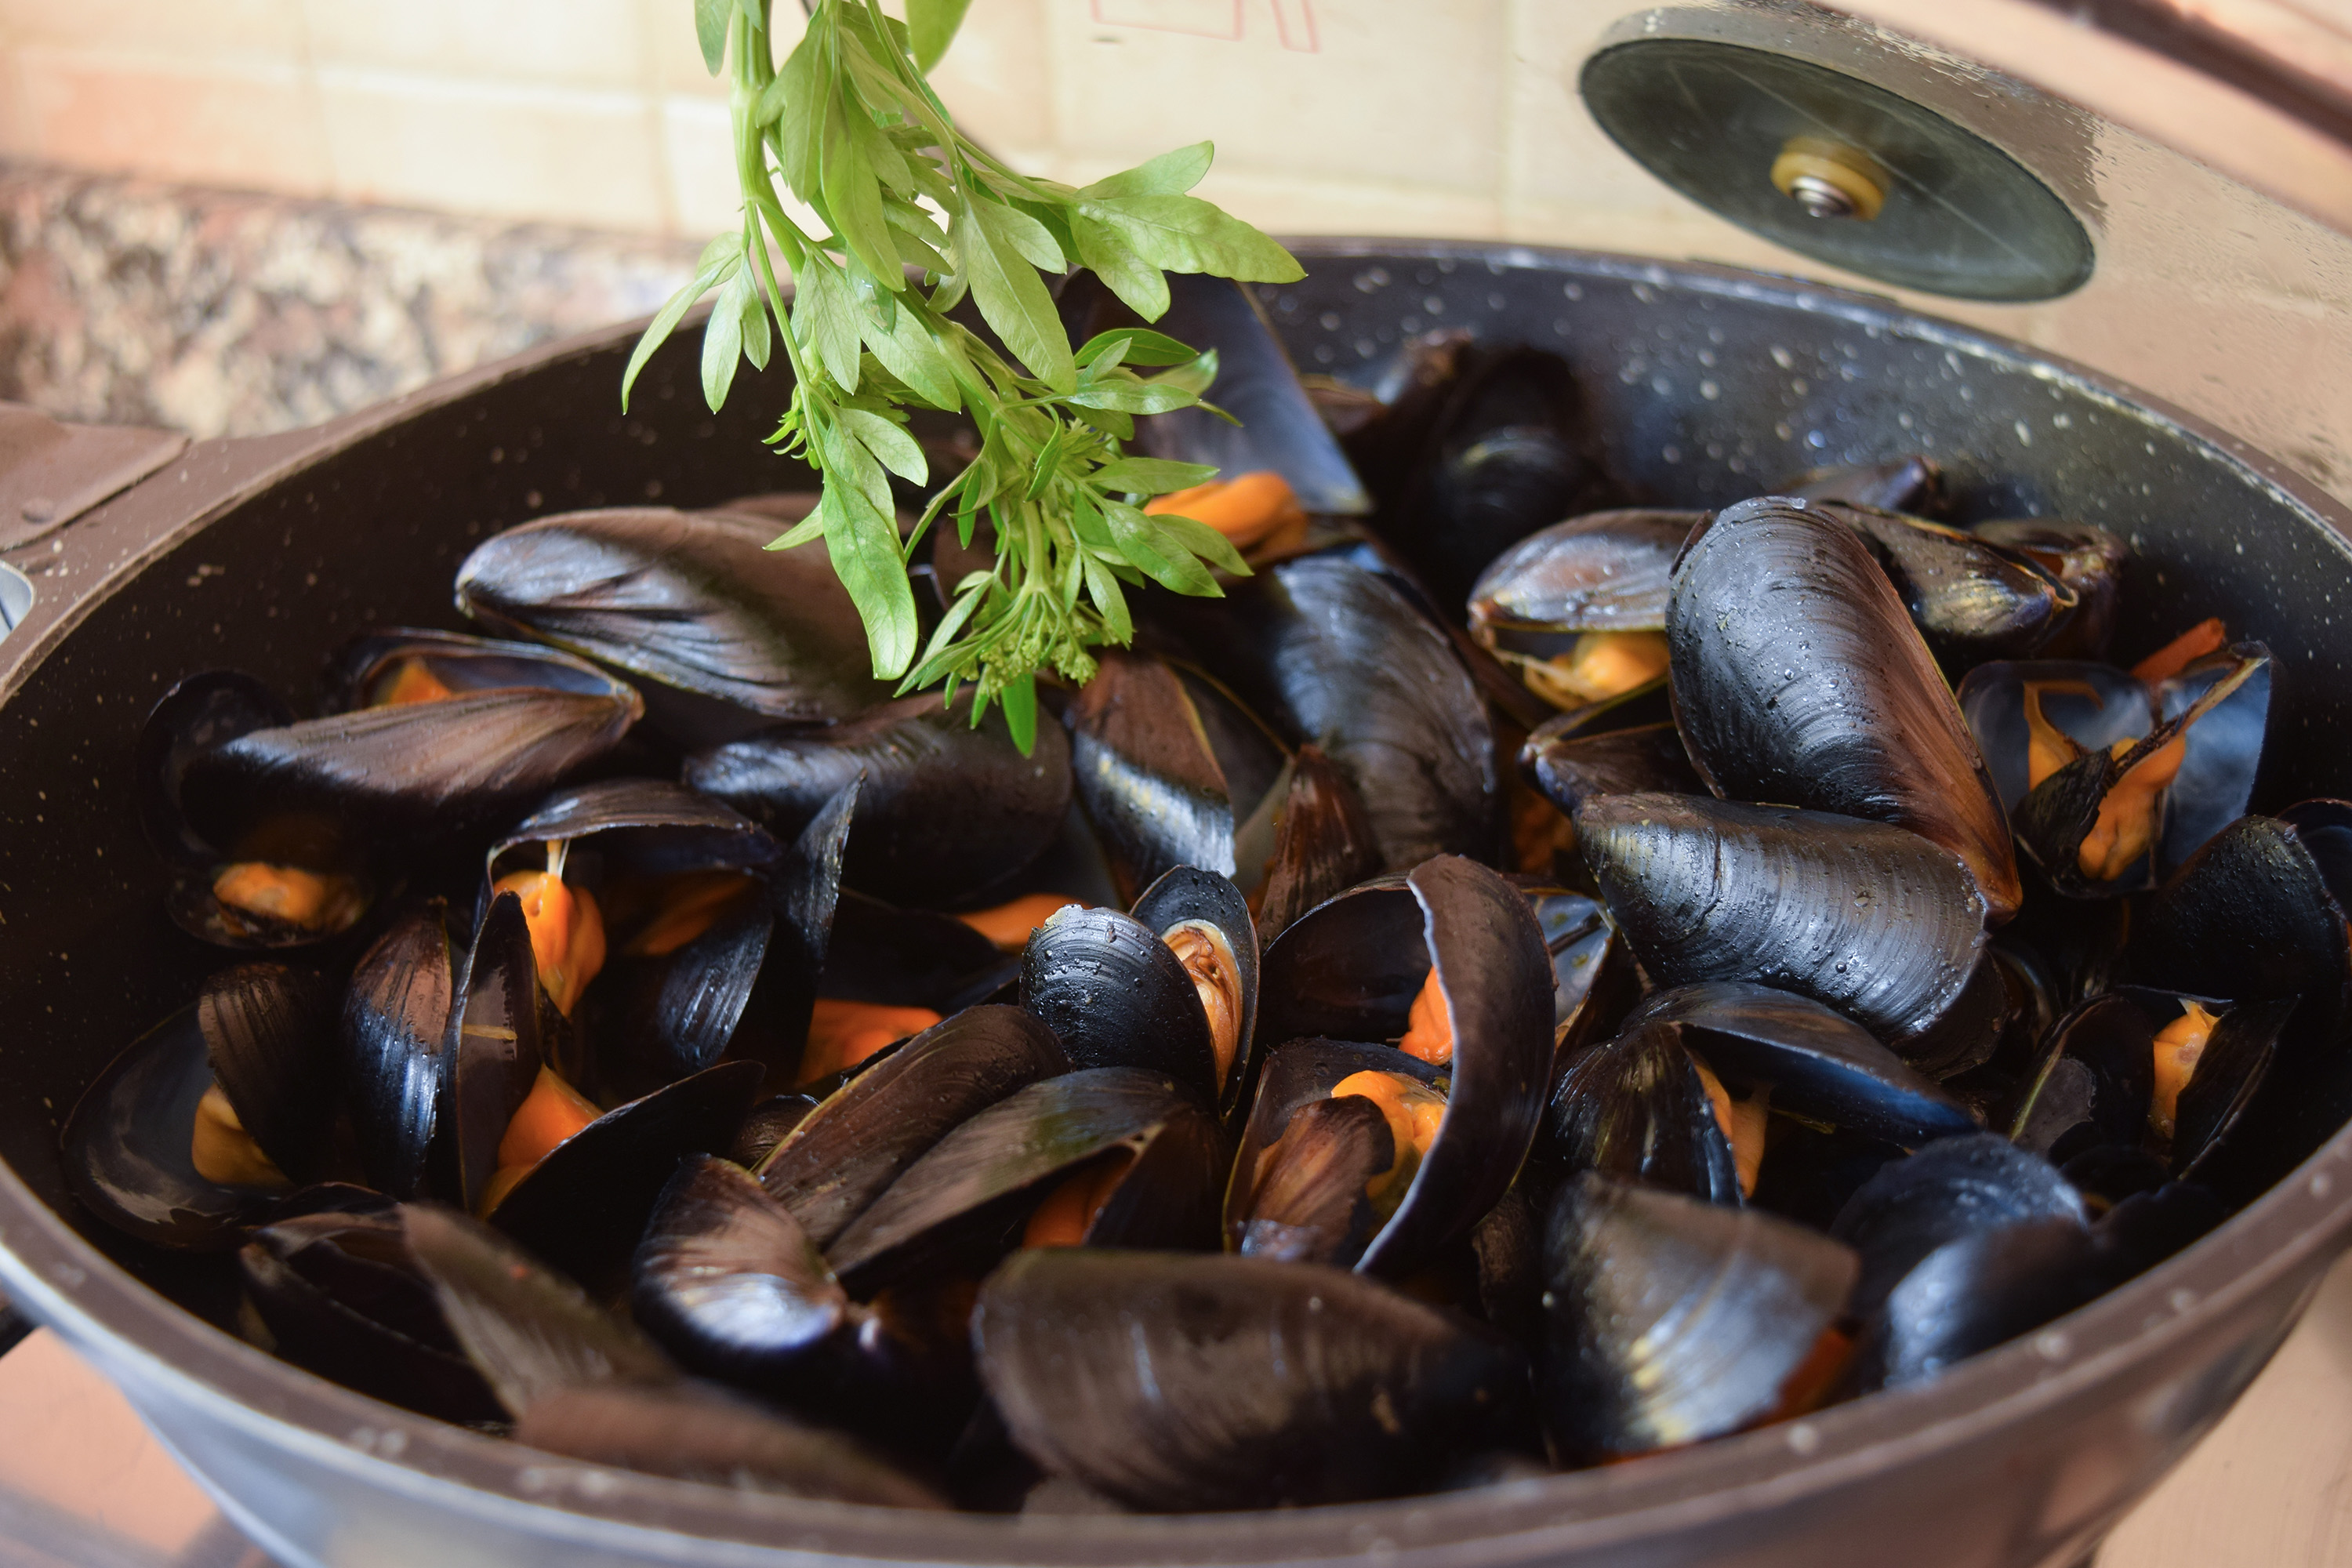 Mussels in Carta fata® - Decorfood Italy 